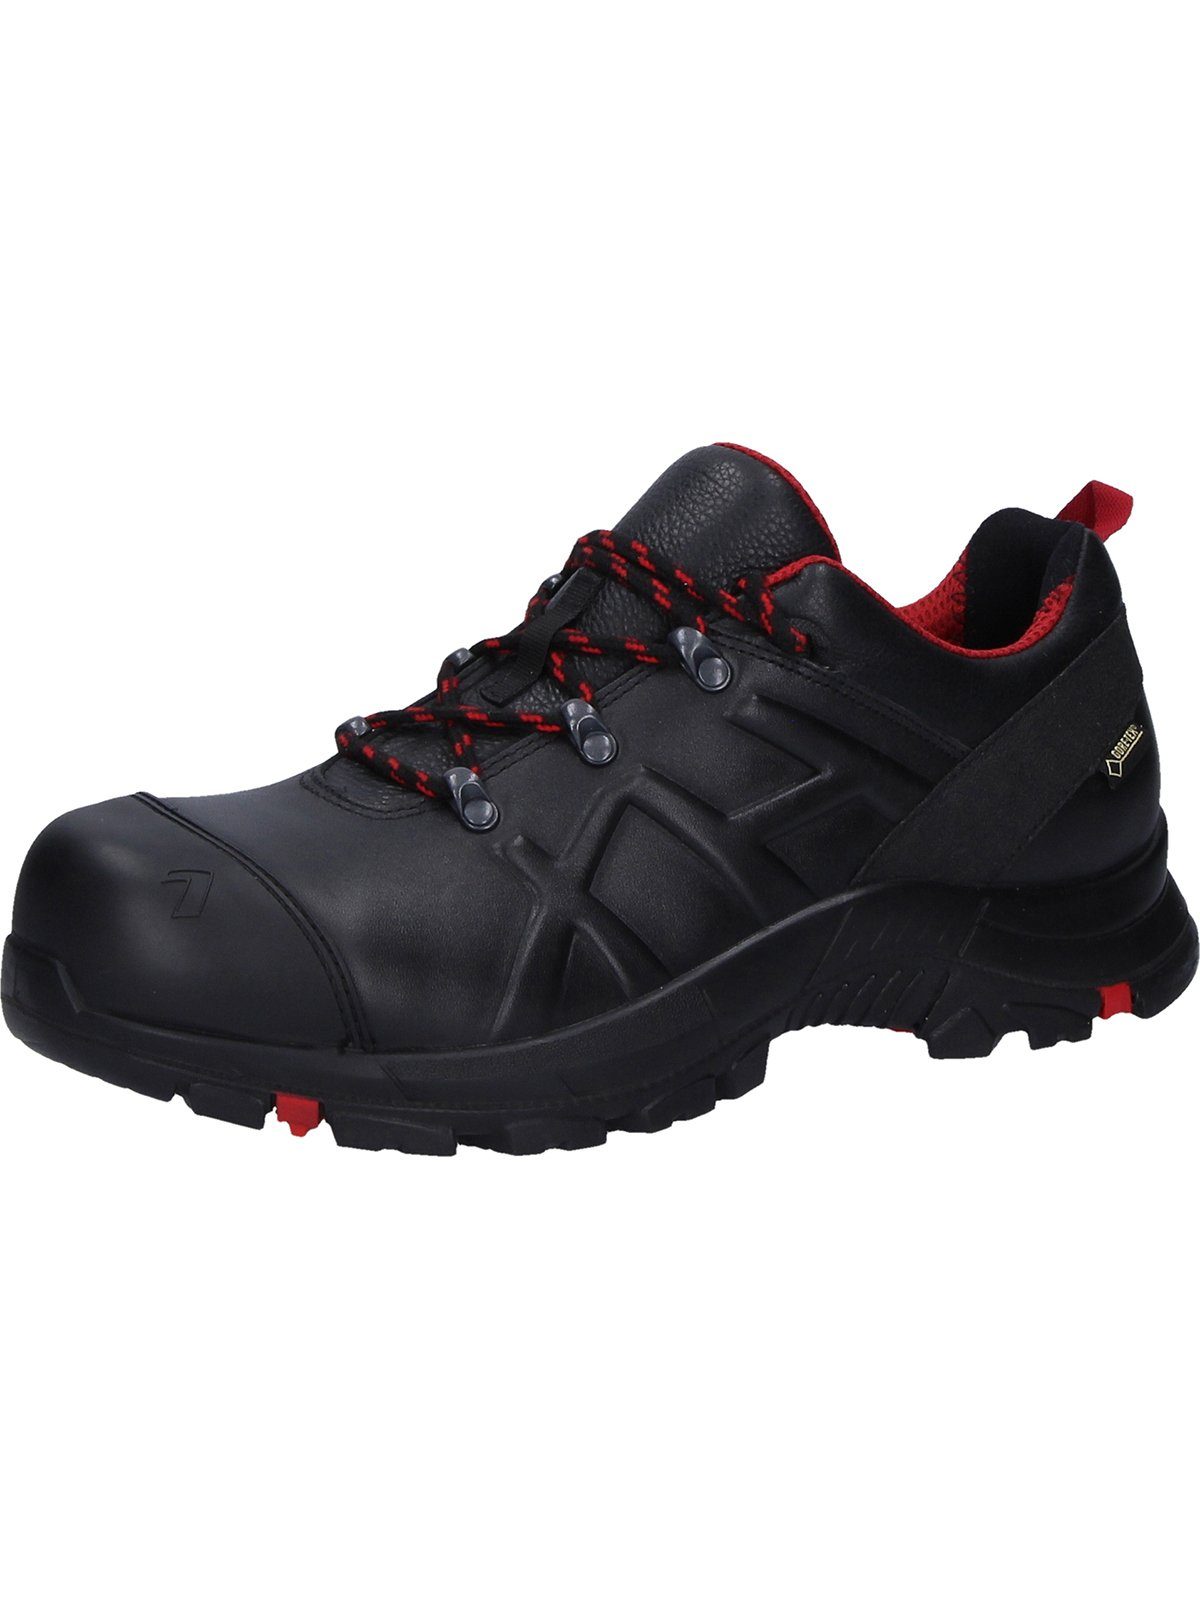 haix Black Eagle Safety low black/red Arbeitsschuh 54